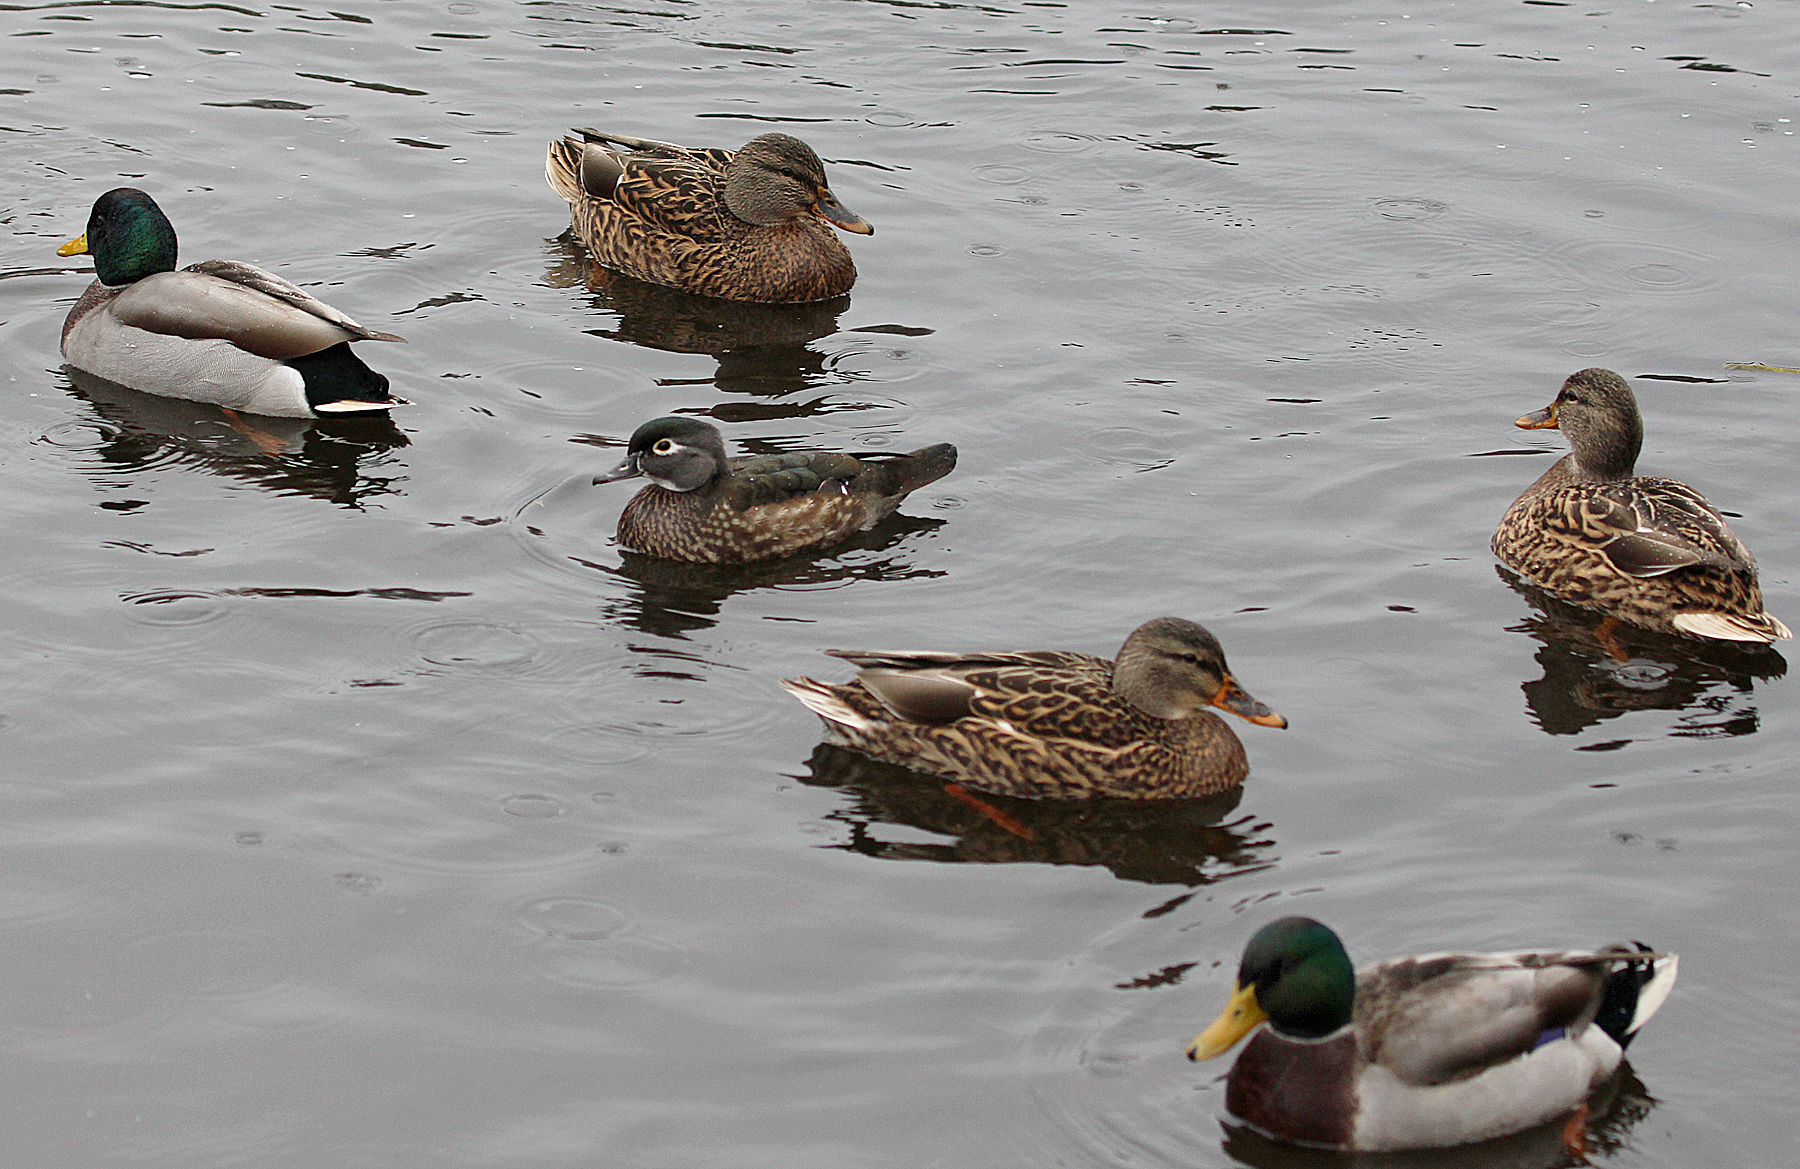 Wood Duck in mixed company with Mallards | Birds of New England.com